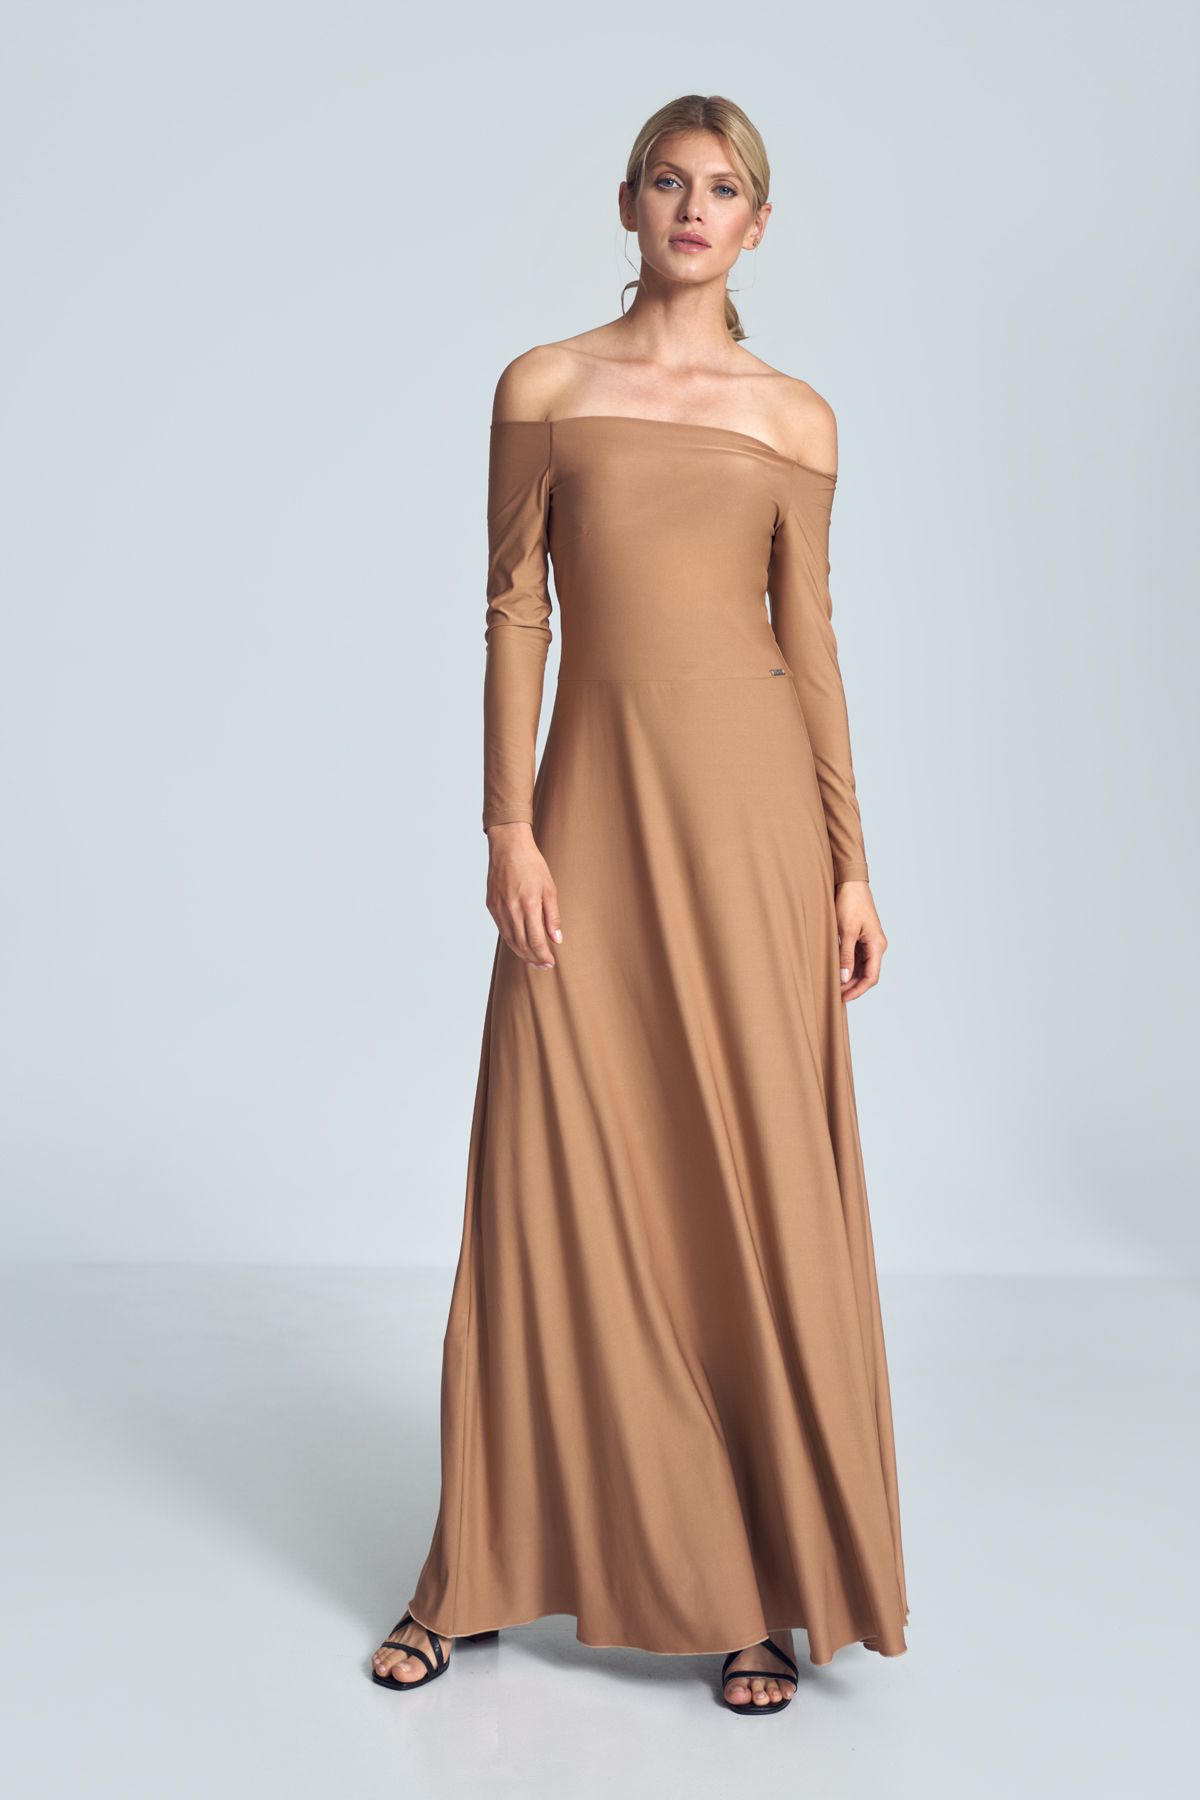 Beige sensual maxi dress with long sleeves, large neckline - cold shoulders, pleats at the bust, sewn at the waist.